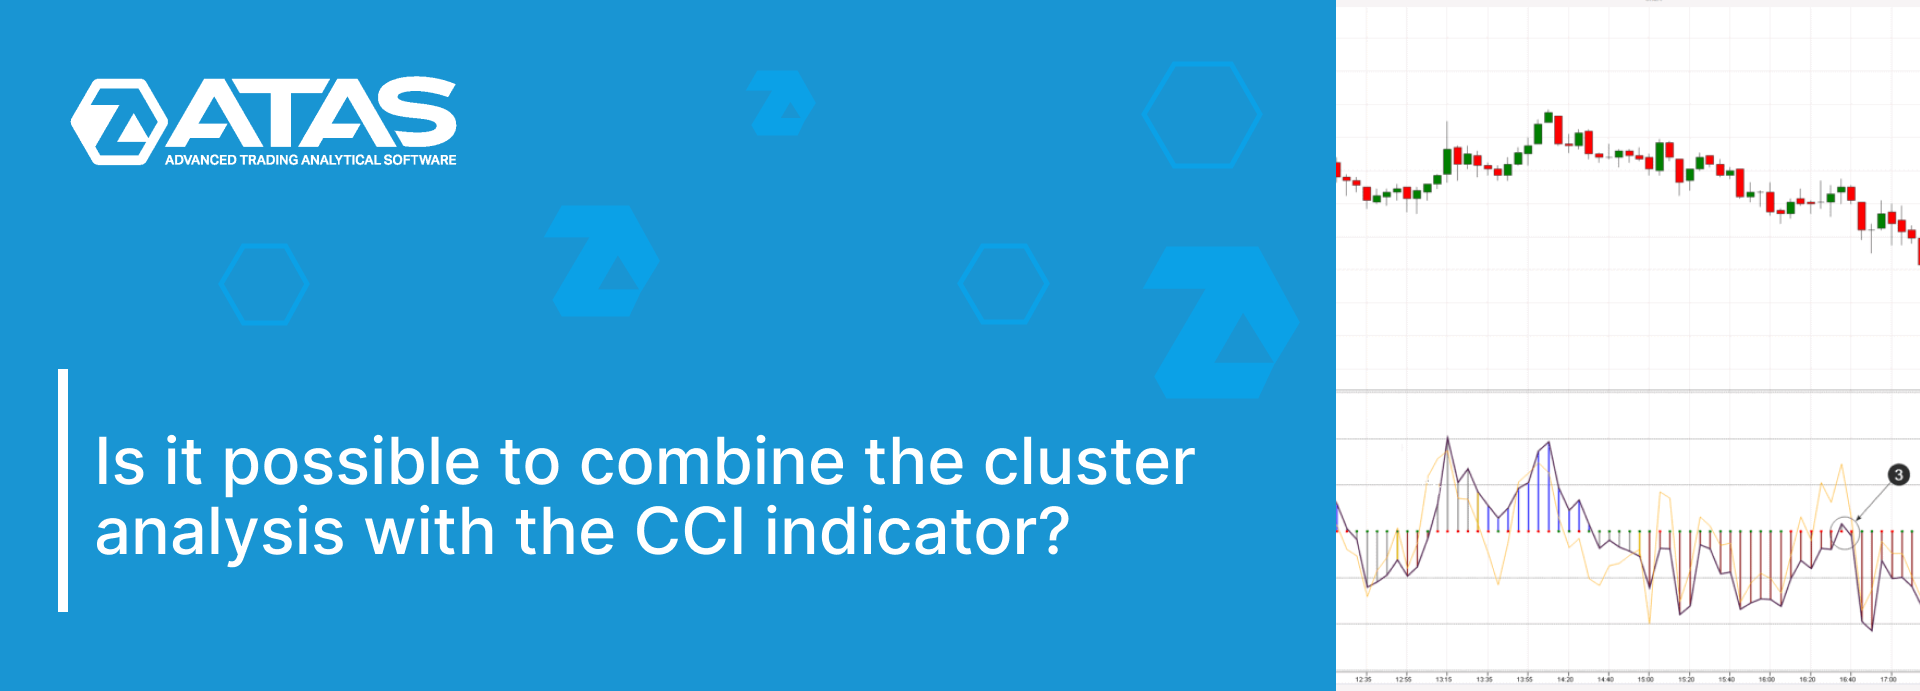 IS IT POSSIBLE TO COMBINE THE CLUSTER ANALYSIS WITH THE CCI INDICATOR?